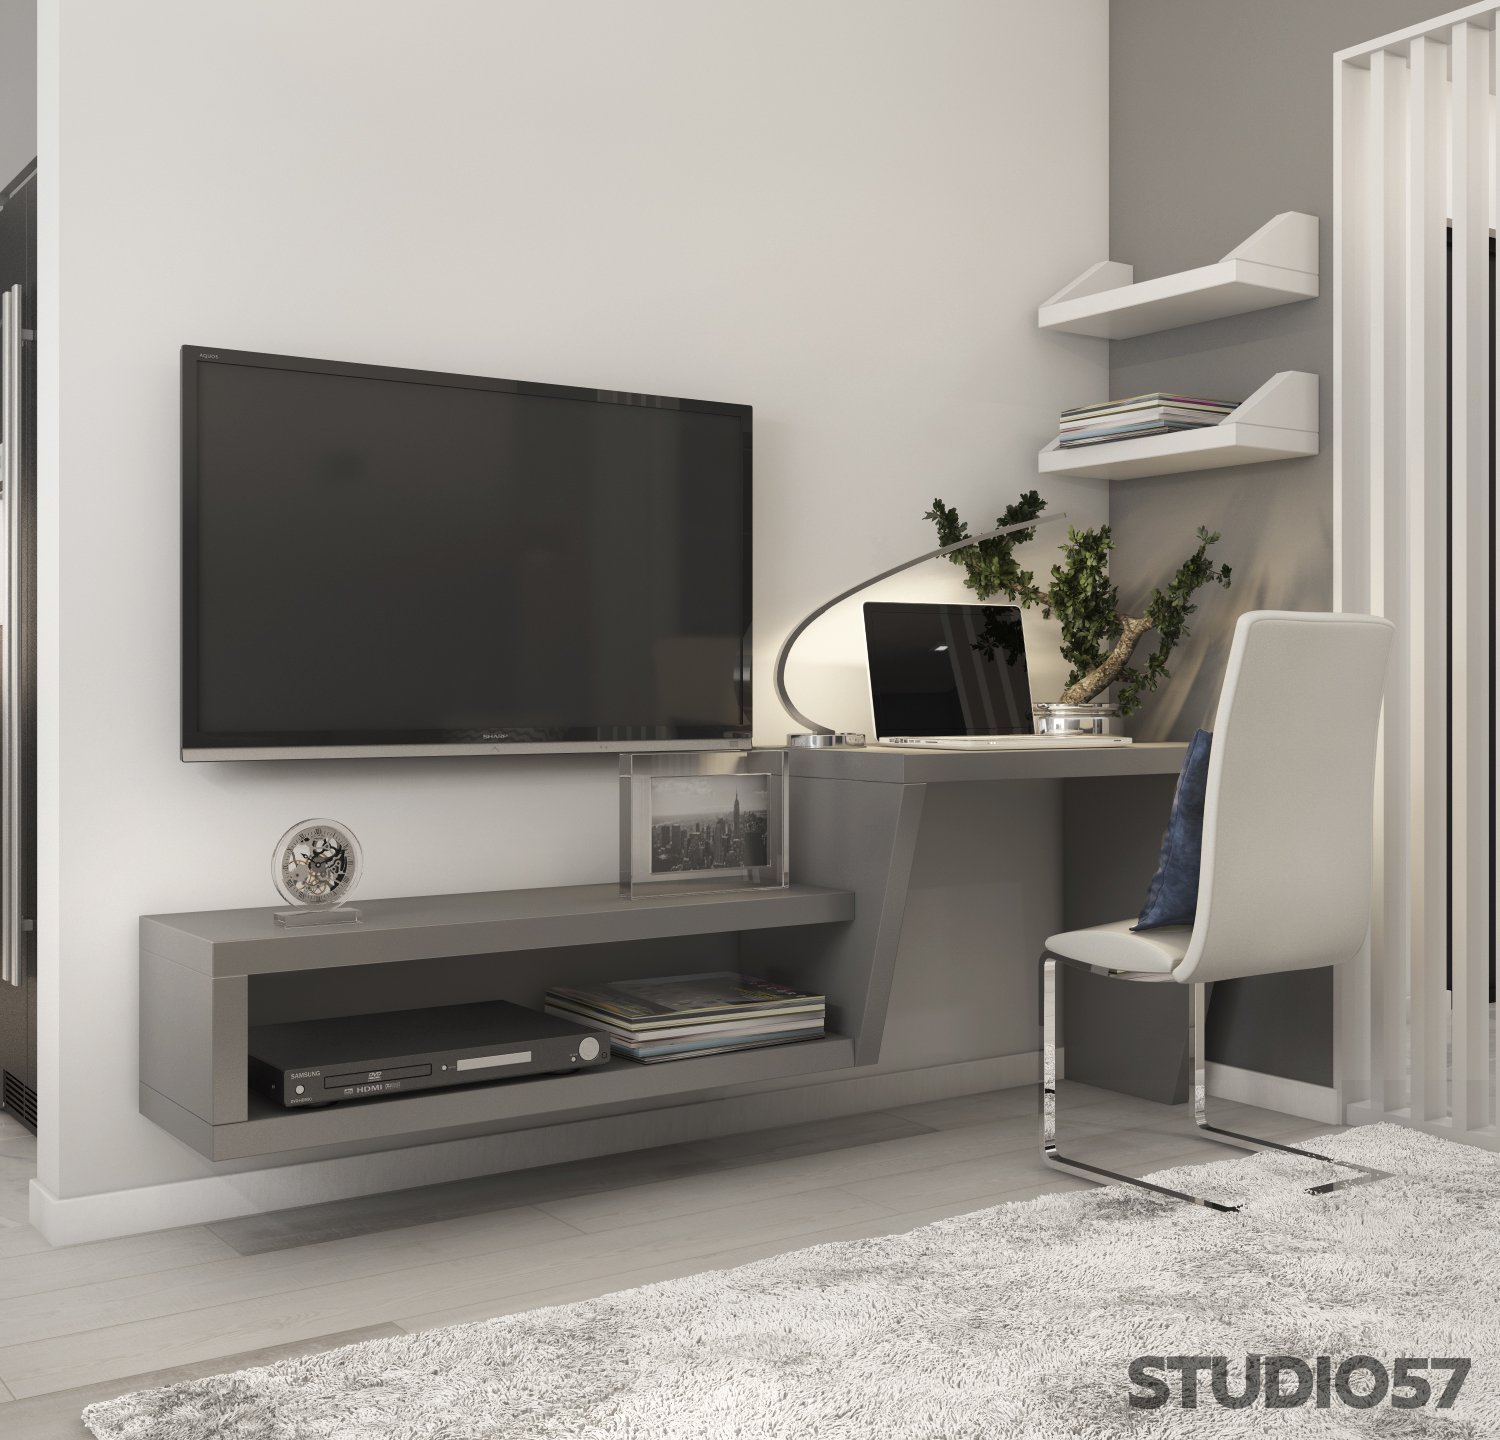 Picture of the modern living room design